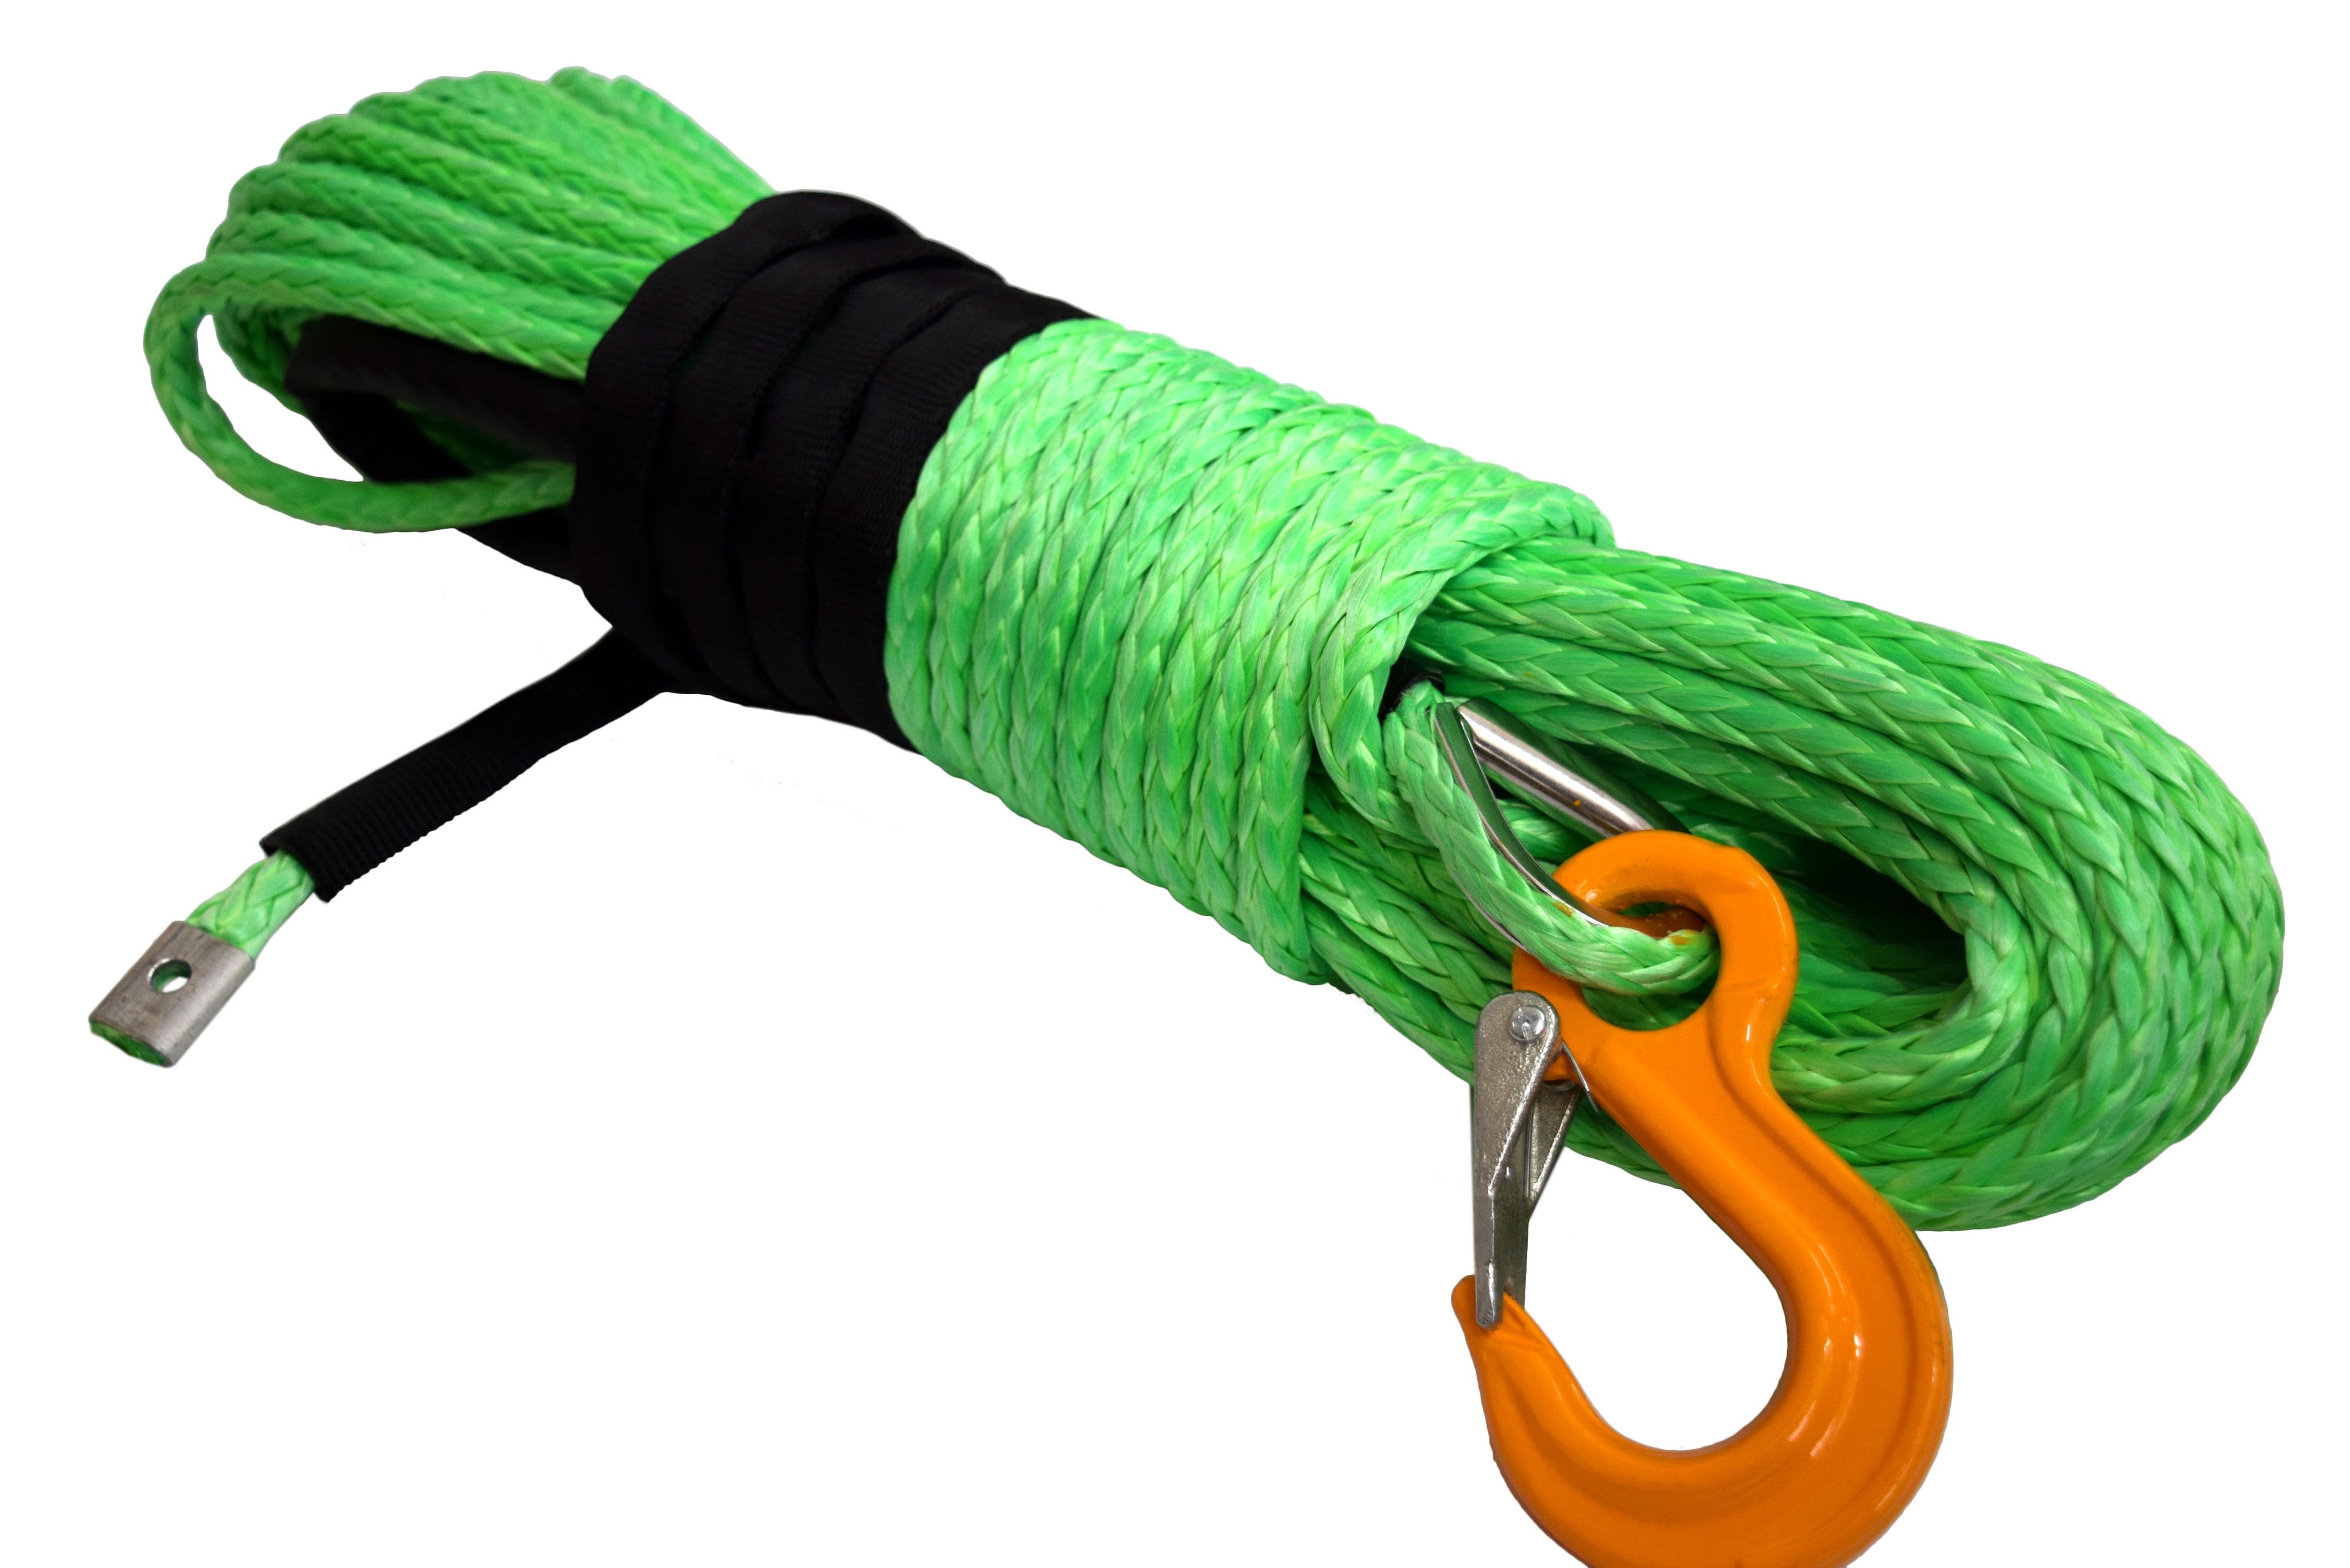 QIQU green 100ft 3/8 inch 4x4 SUV Off-road car synthetic winch cable rope line with thimble sleeve hook lug